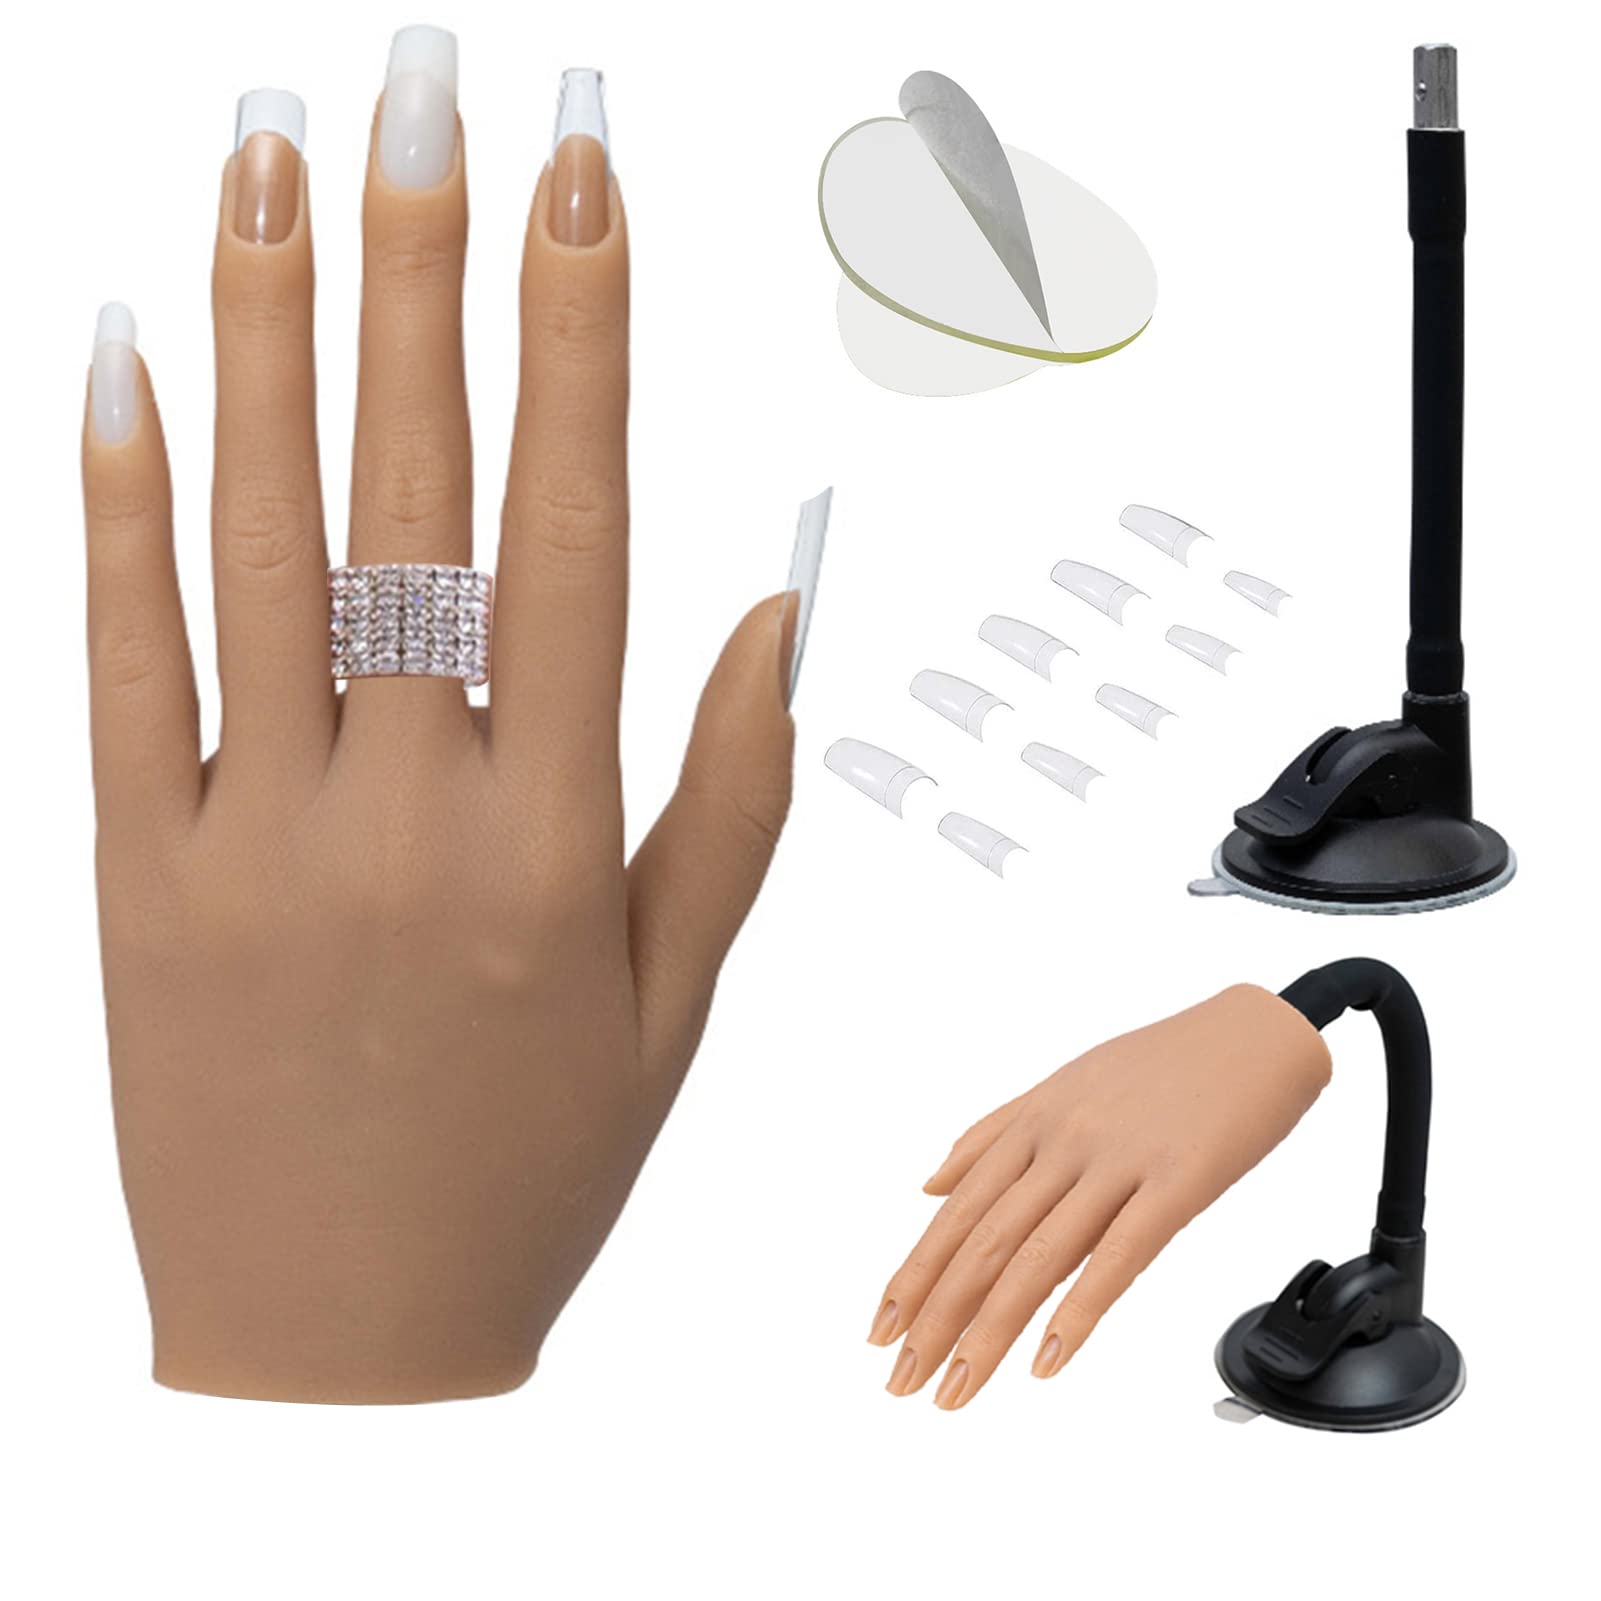 Nail Practice Hand Soft Flexible Female Mannequin Silicone Hand Model  Manicure Art Training Photograph Jewelry Display